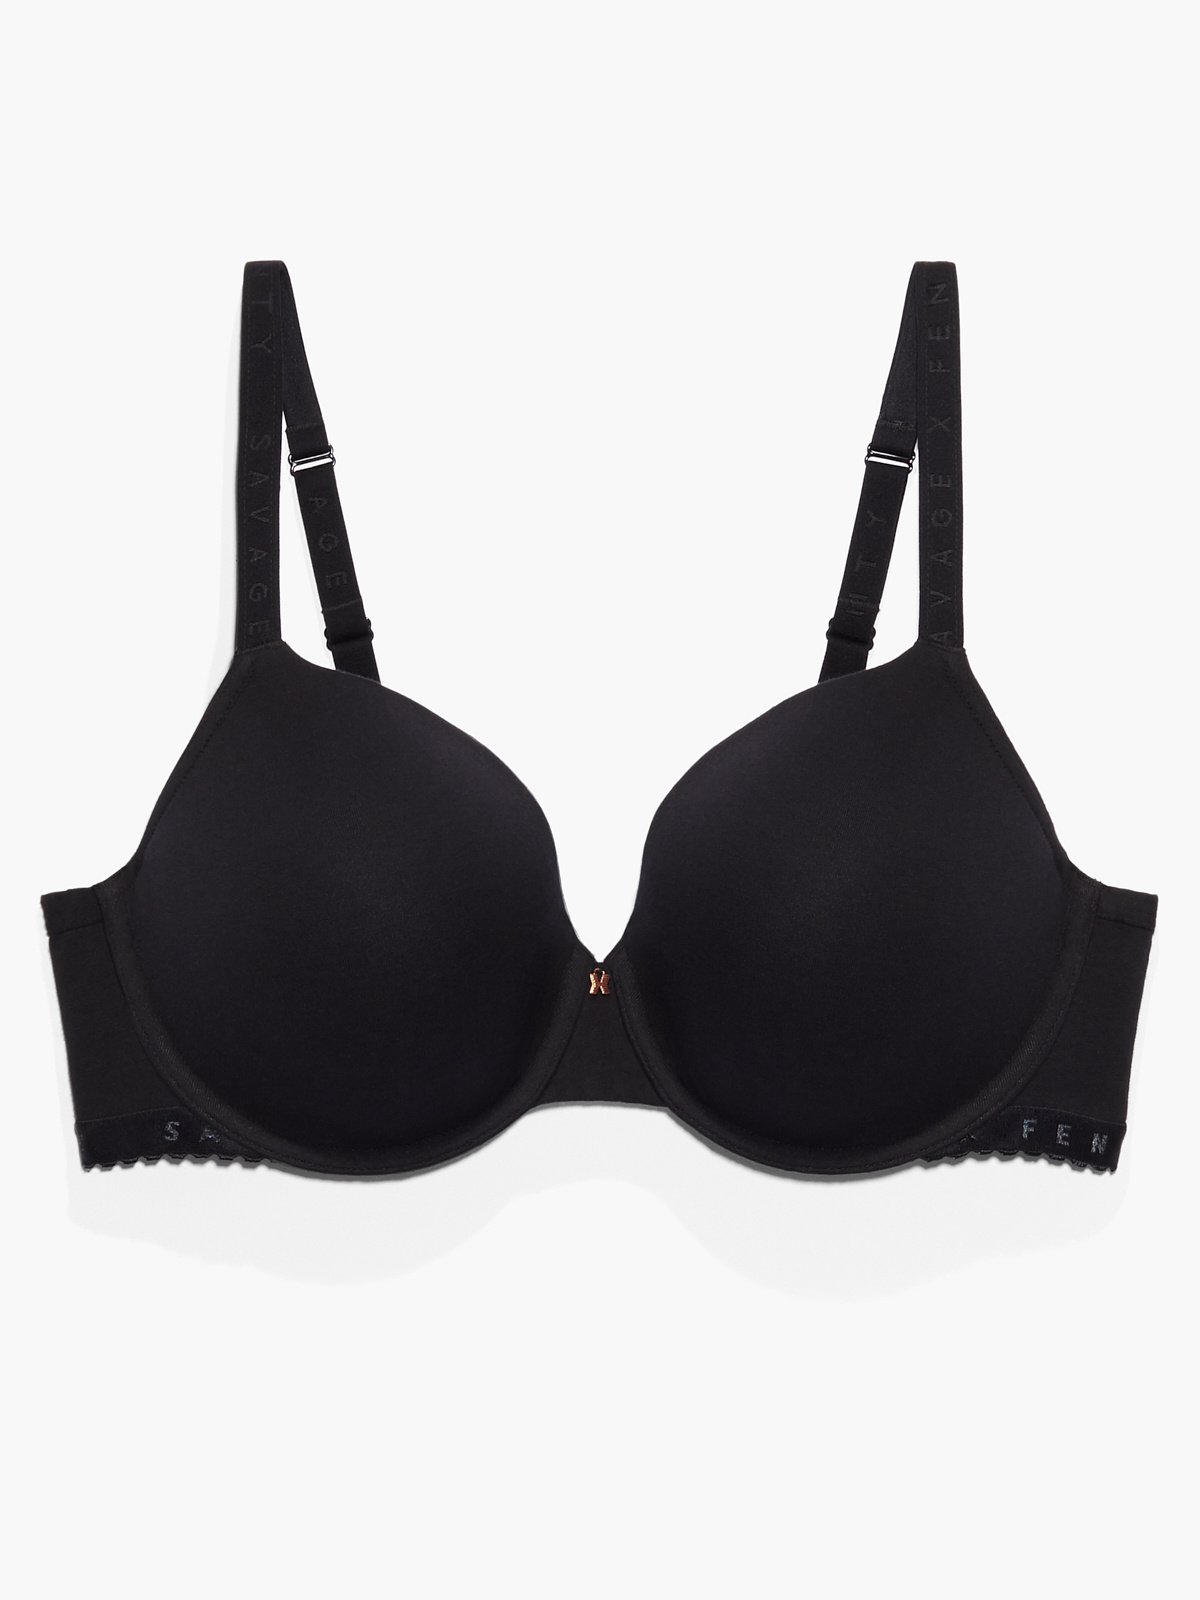 Buy Bwitch Non-Wired Non-Padded Bra 